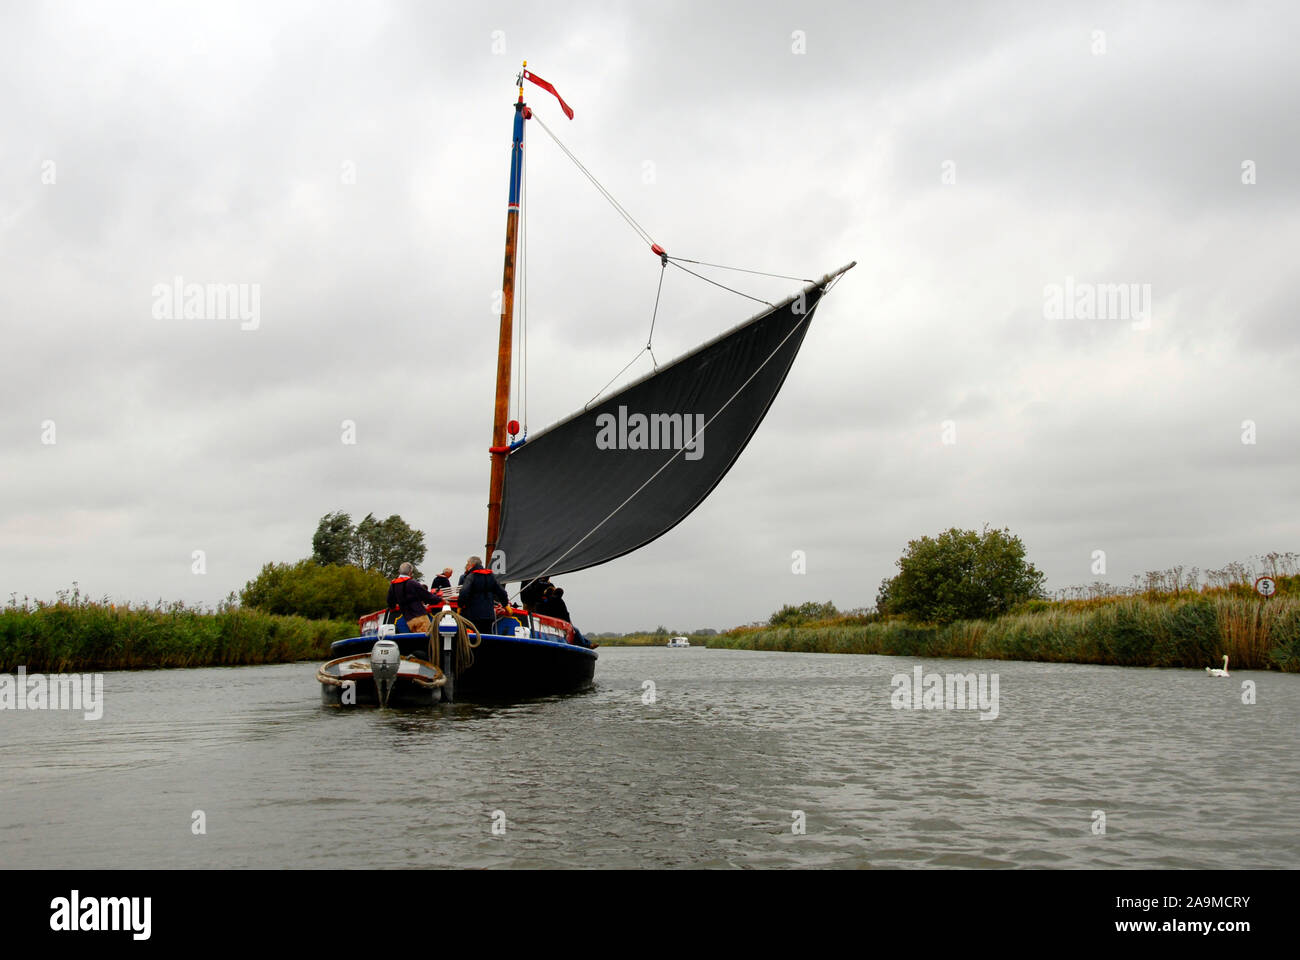 The wherry 'Albion' sailing on a river, Norfolk, England, in inclement weather Stock Photo